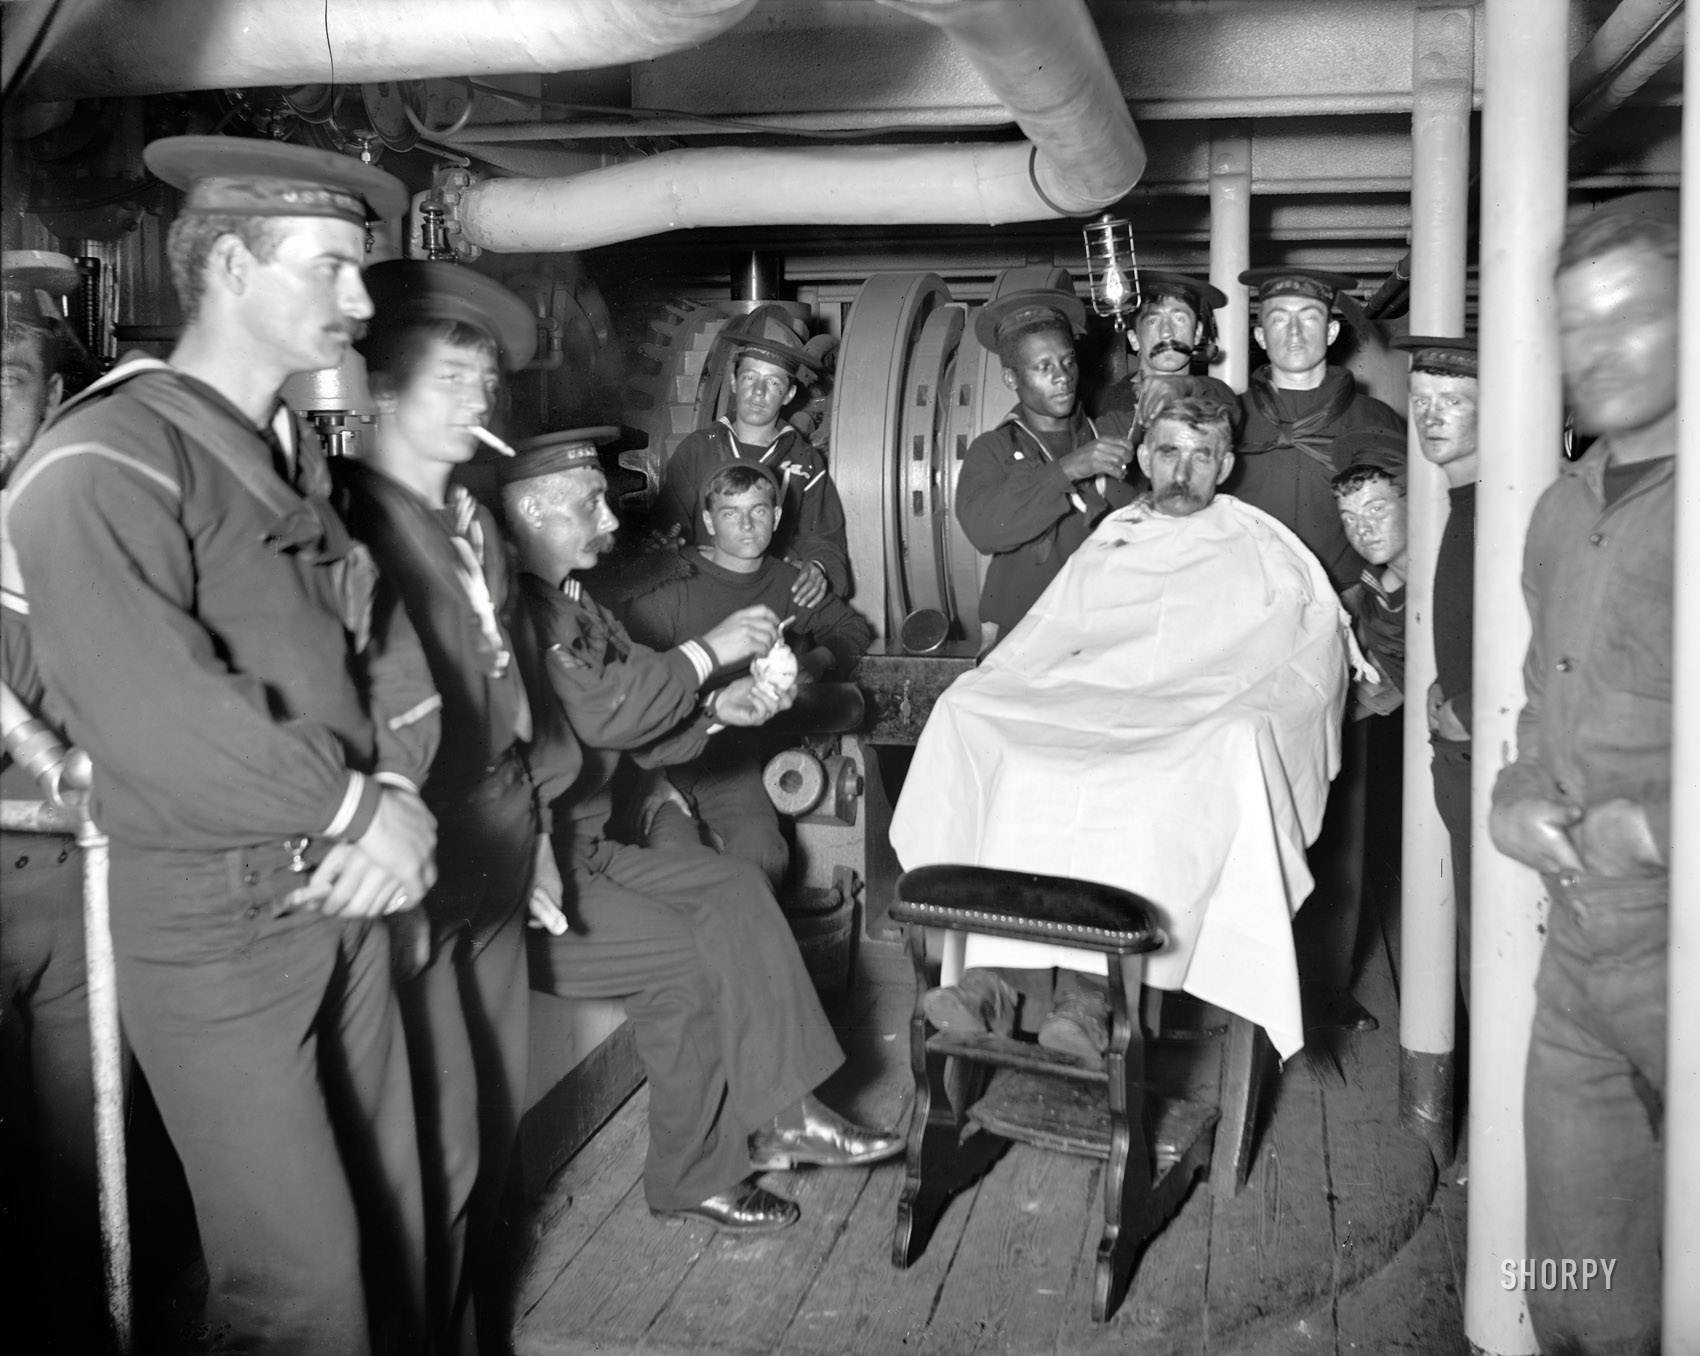 Aboard the U.S.S. Brooklyn circa 1898. "Barber shop." Where a sailor goes to get his topsail trimmed. 8x10 glass negative, Detroit Publishing Co. View full size.